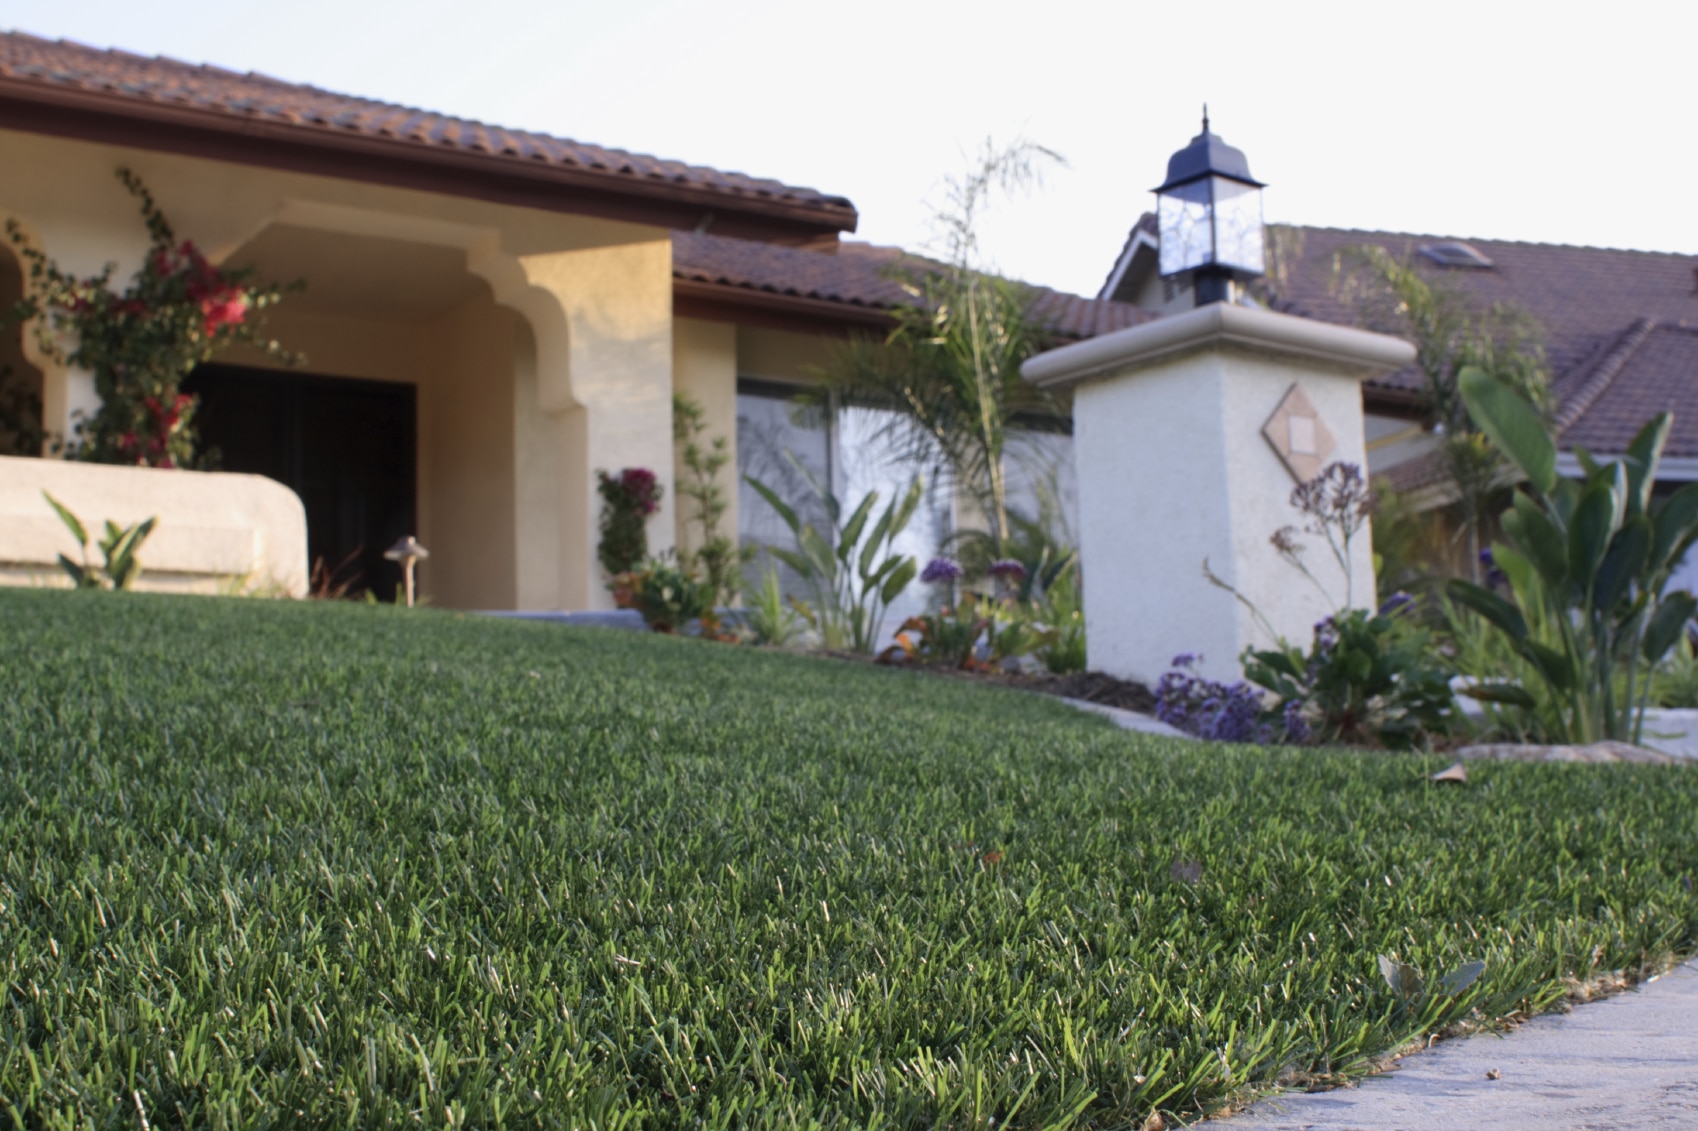 How to Care for Your Lawn During a Drought